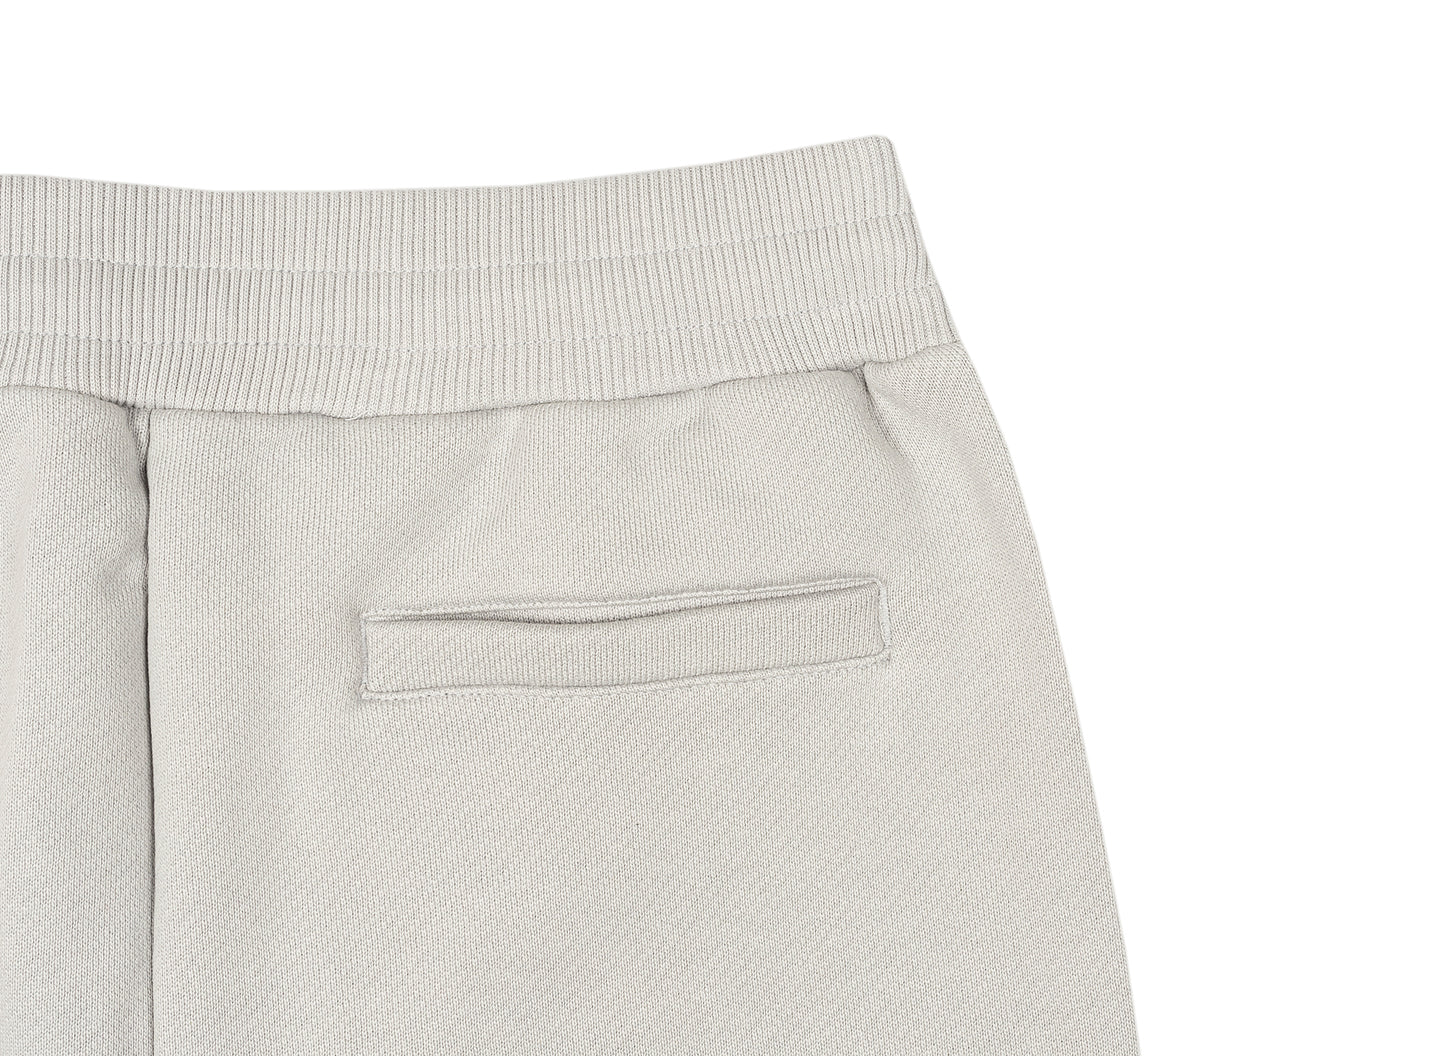 A-COLD-WALL* Knitted Logo Sweatpants